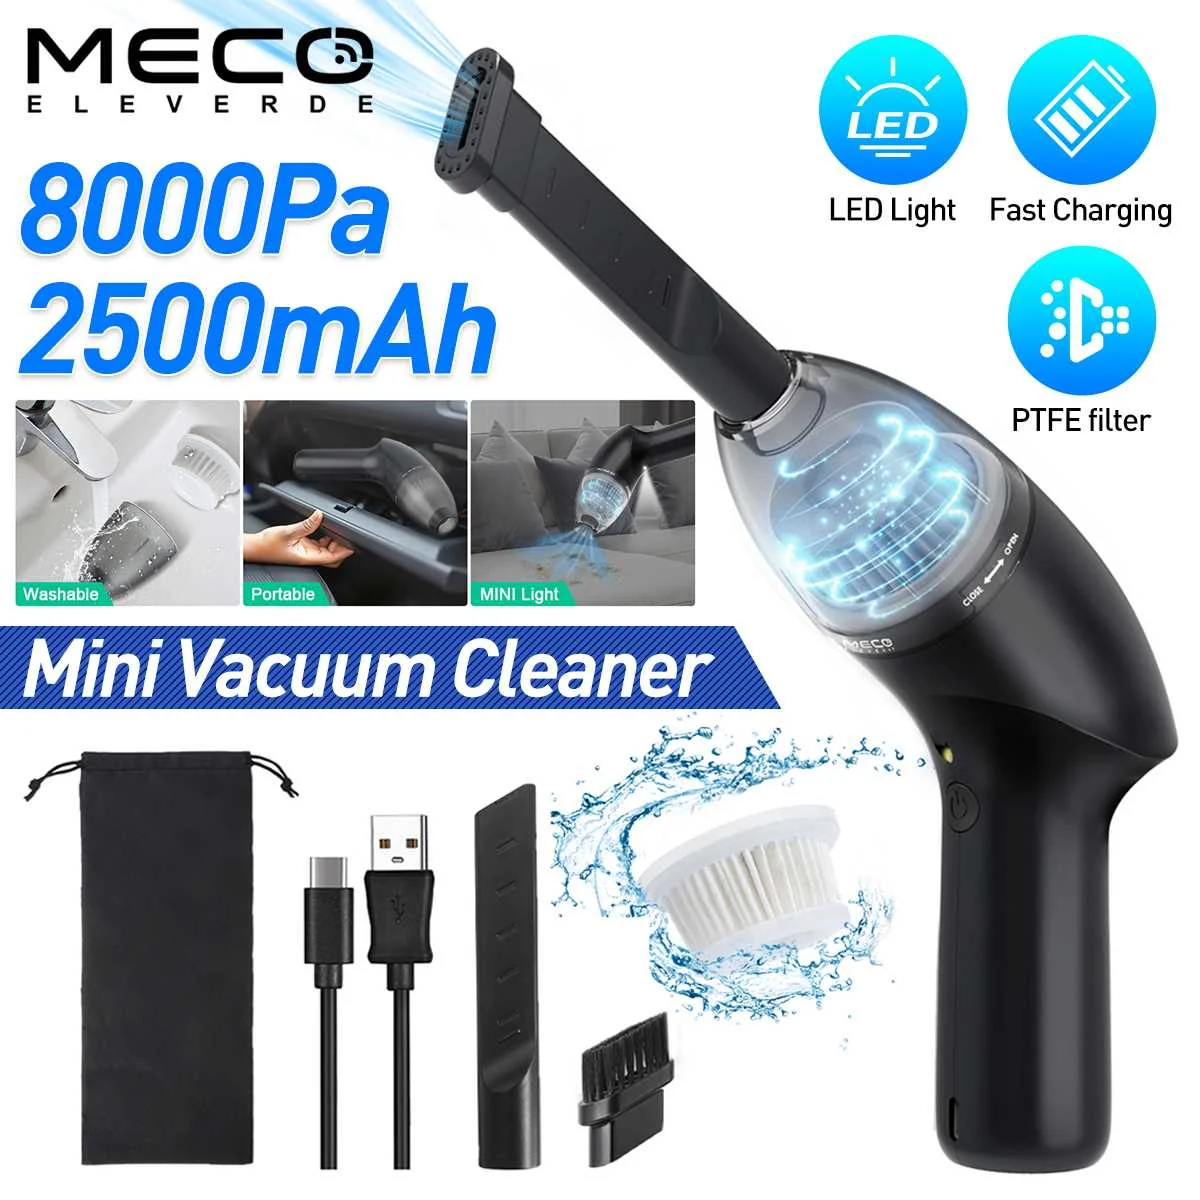 

MECO 8000Pa Mini Vacuum Cleaner Keyboard Cleaner Cordless Handheld Compressed Desk Cleaning Machine with LED Light Dust Hairs